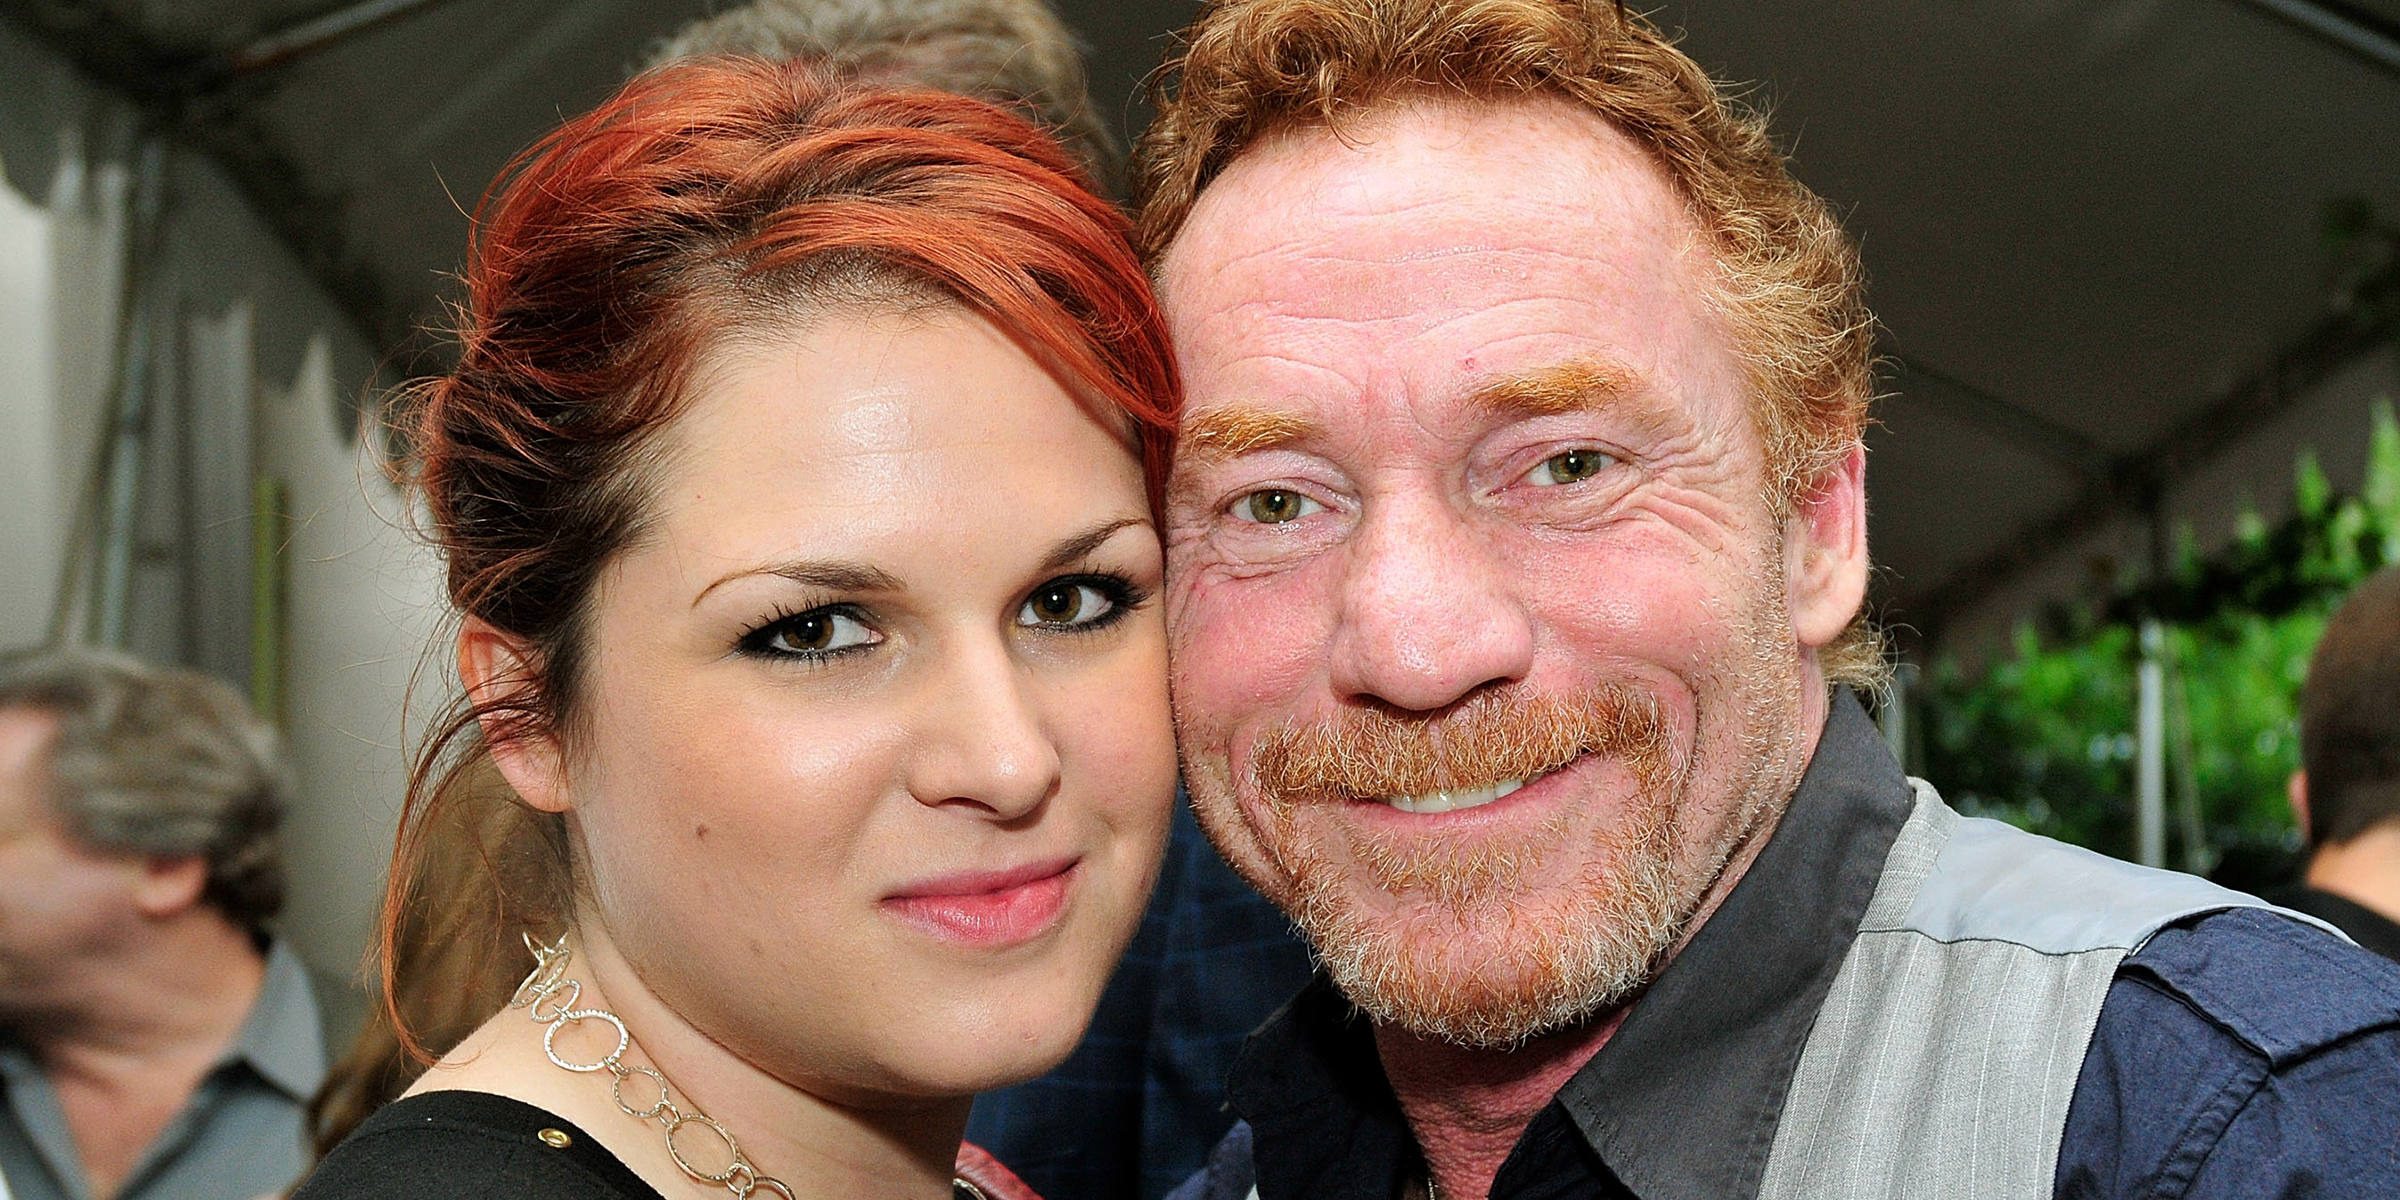 Amy Railsback and Danny Bonaduce | Source: Getty Images